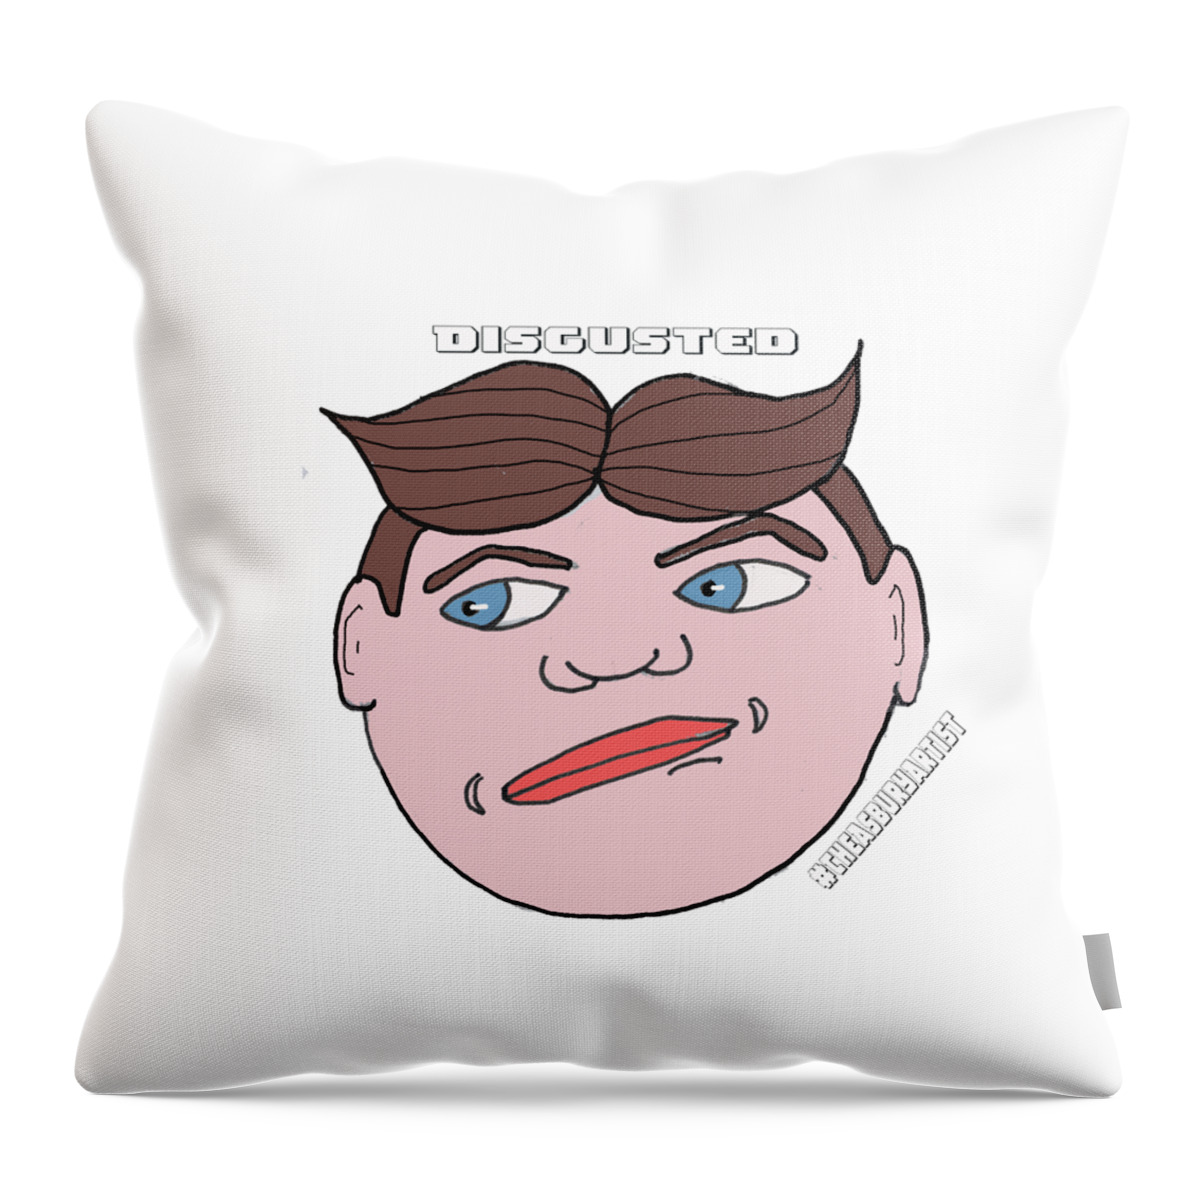 Asbury Park Throw Pillow featuring the painting Disgusted by Patricia Arroyo